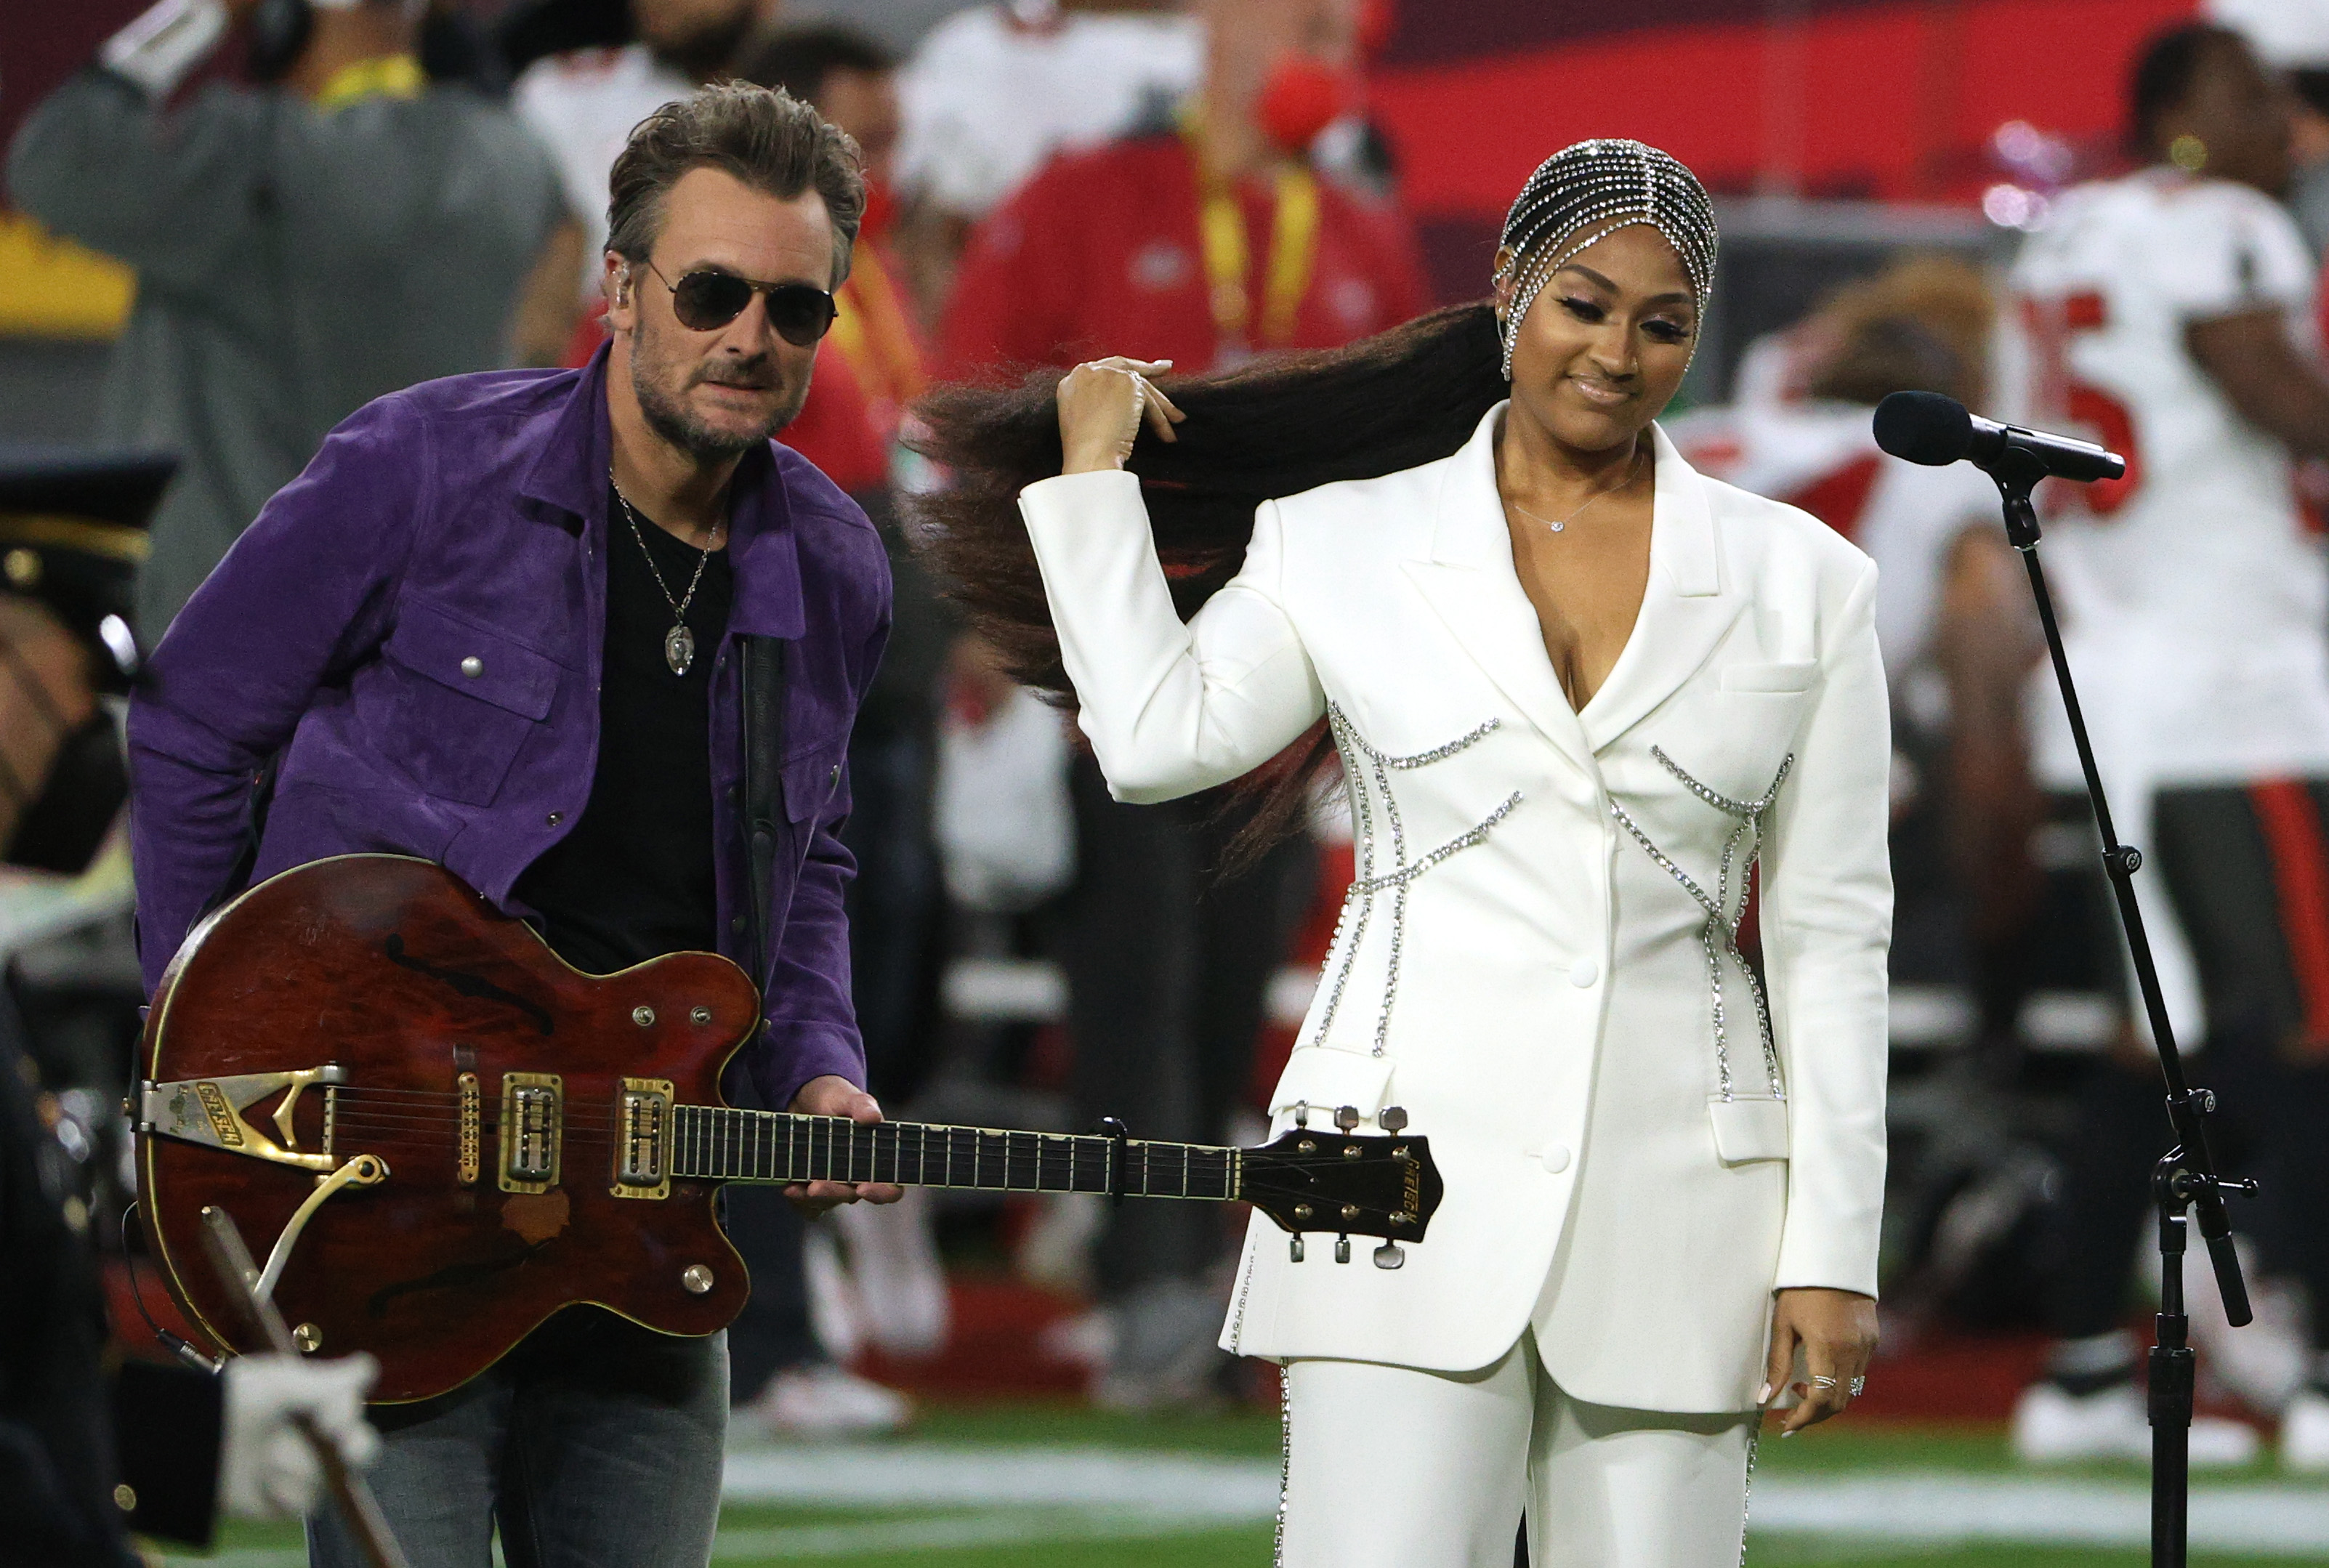 TAMPA, FLORIDA - FEBRUARY 07: Jazmine Sullivan and Eric Church perform the national anthem before Super Bowl LV between the Tampa Bay Buccaneers and the Kansas City Chiefs at Raymond James Stadium on February 07, 2021 in Tampa, Florida.